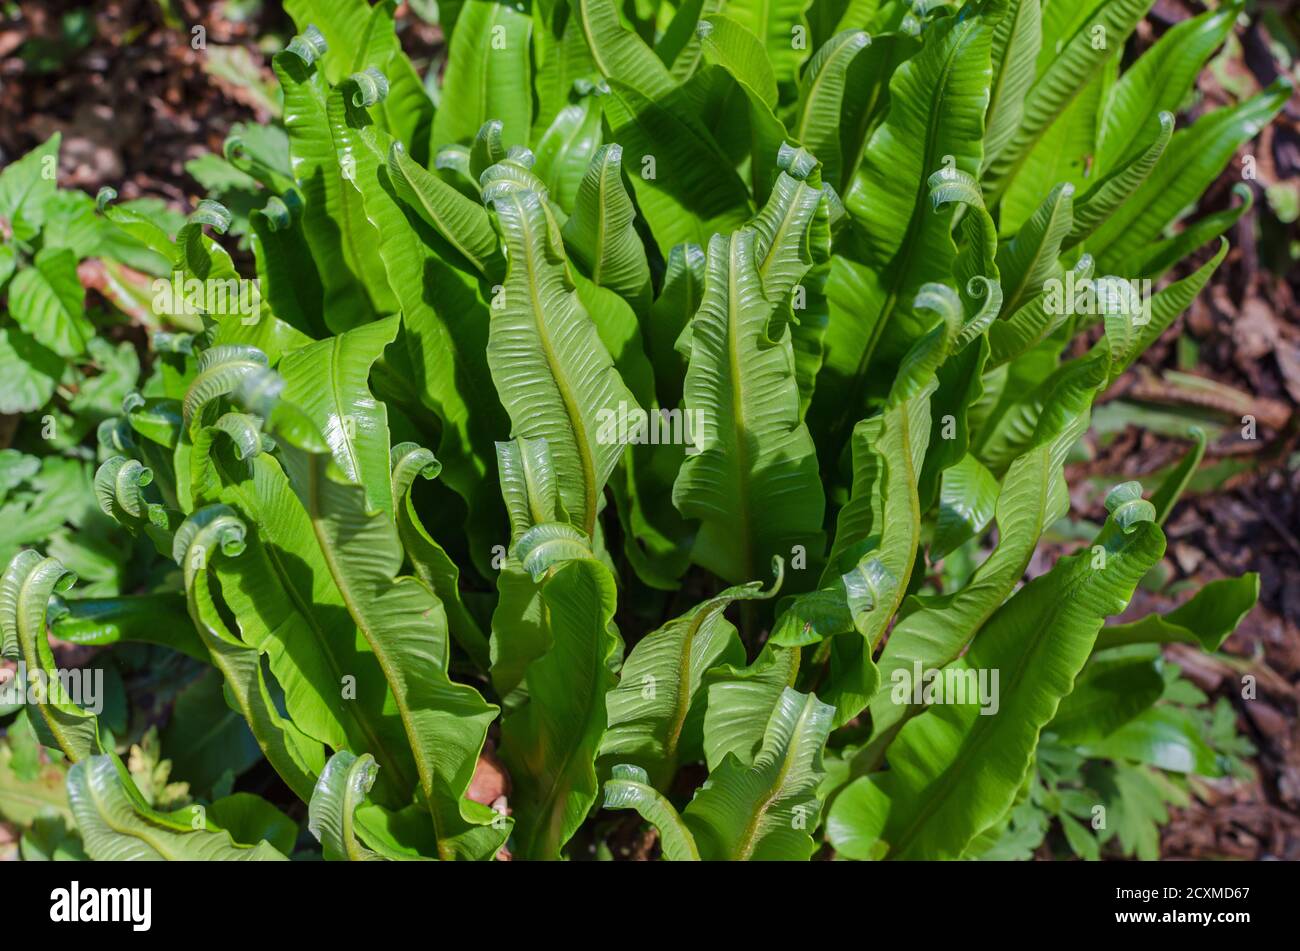 Tongue fern - Phyllitis scolopendrium in the botany in Poland. Stock Photo